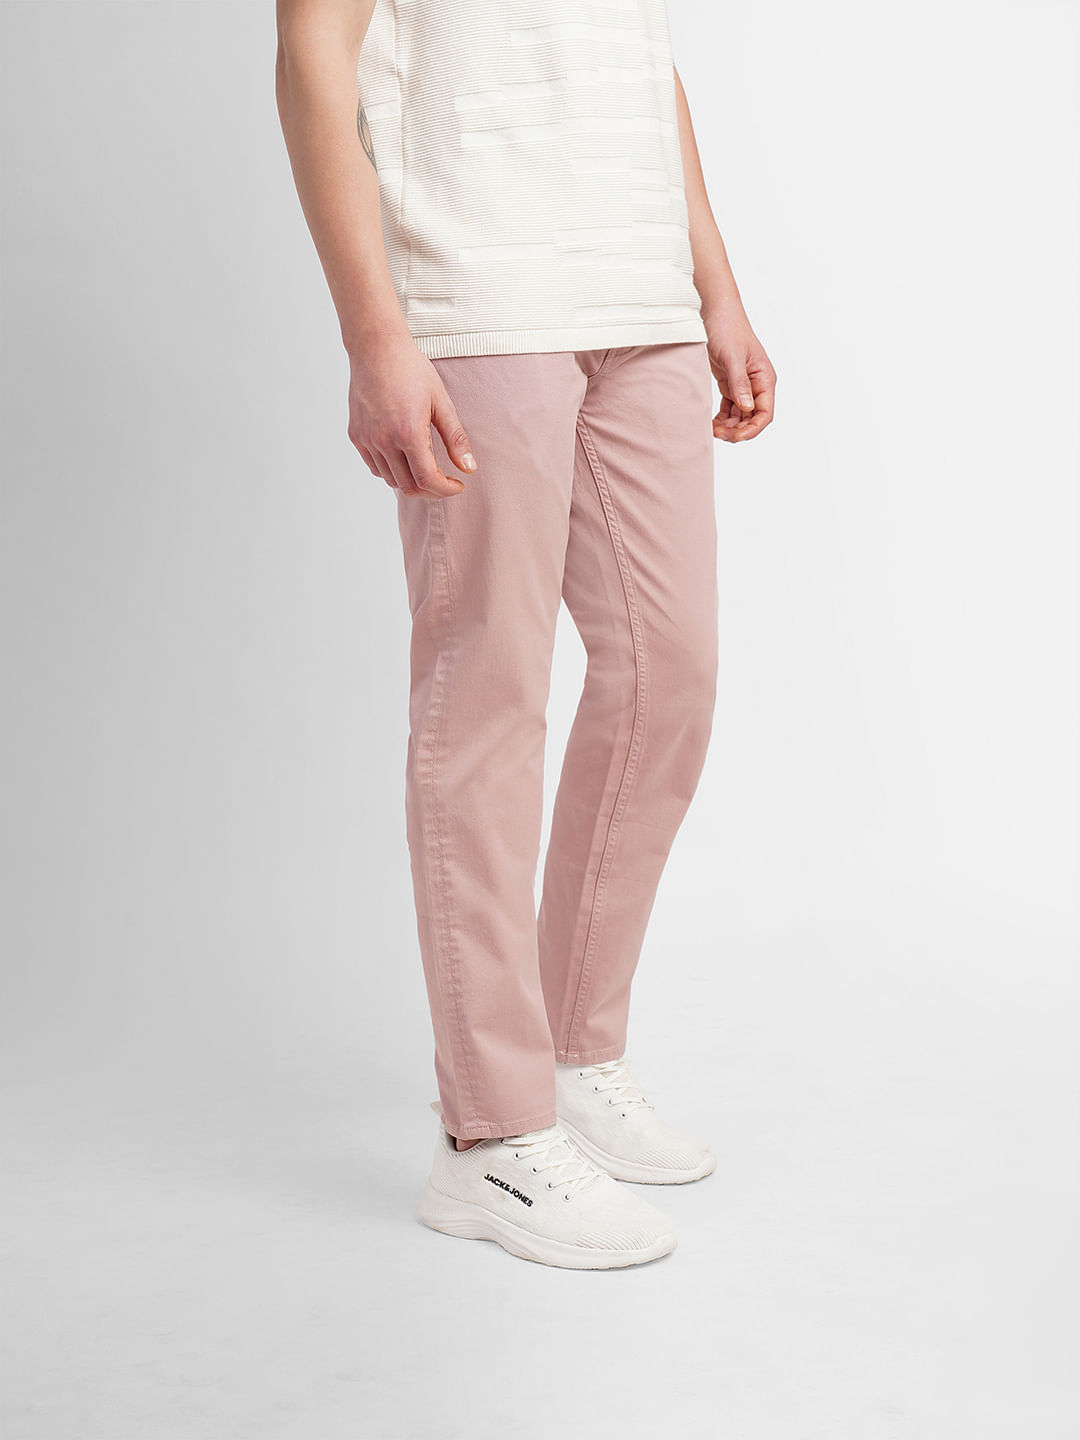 Go Colors Trousers and Pants : Buy Go Colors Women Dusty Pink Chinos  Trousers Online | Nykaa Fashion